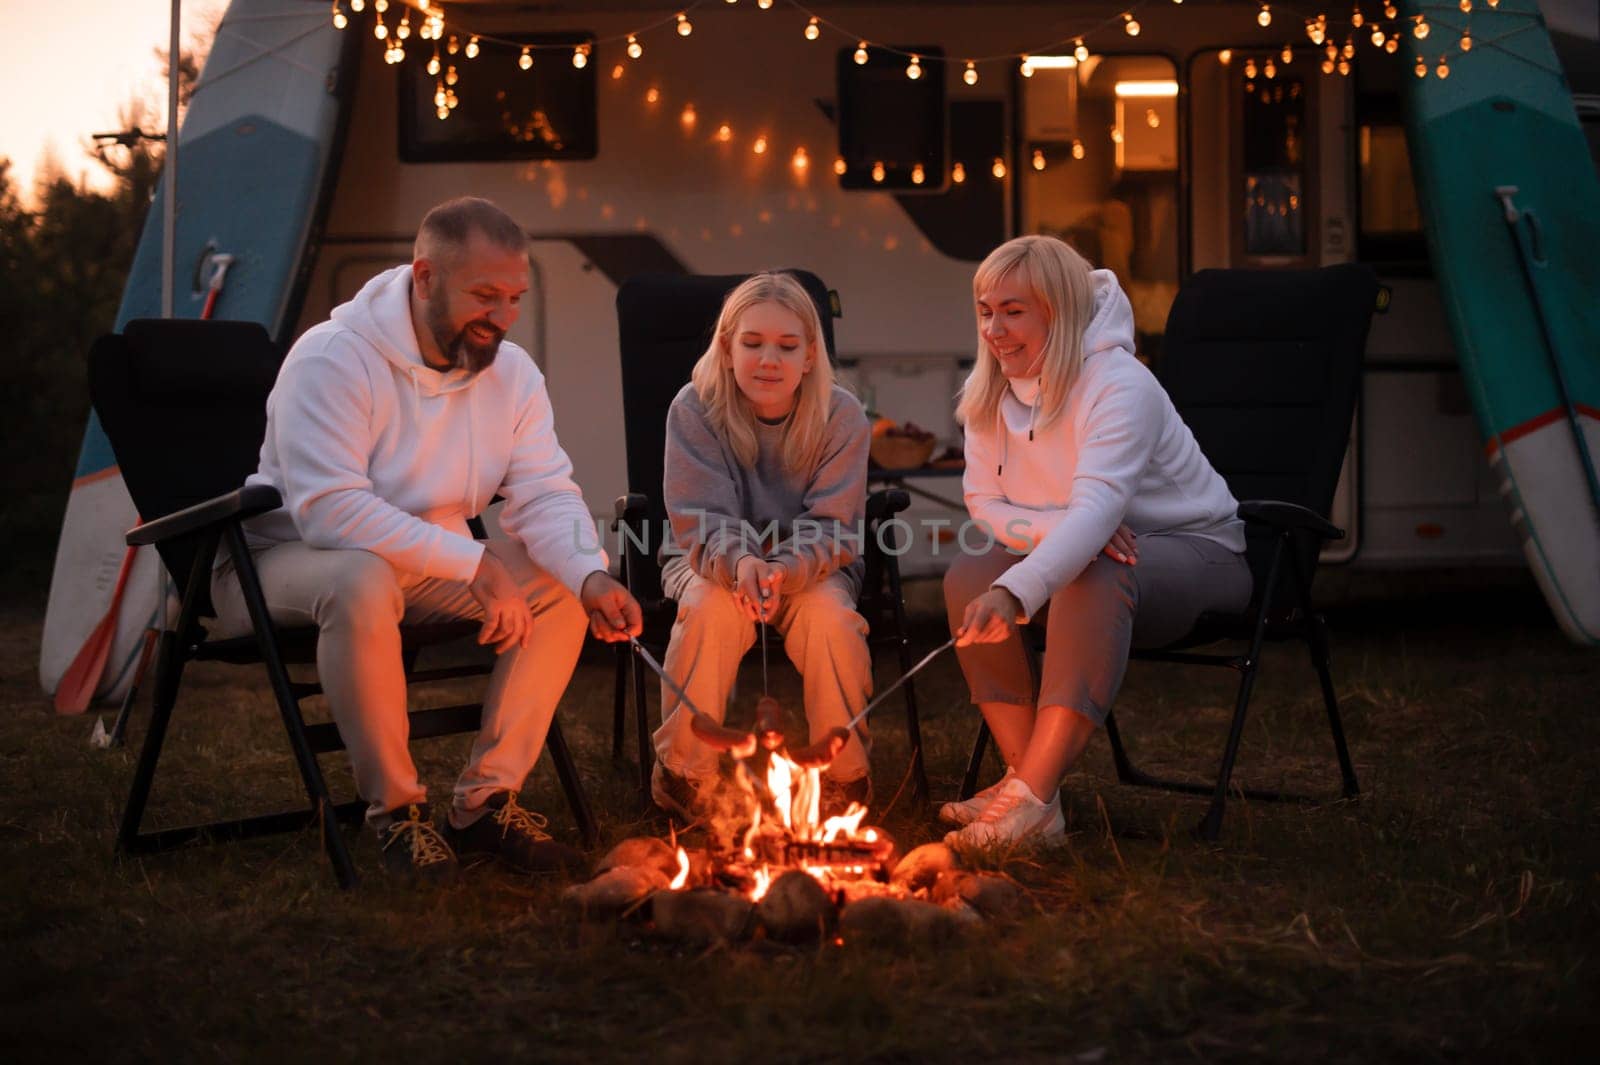 A family cooks sausages on a bonfire near their motorhome in the woods.